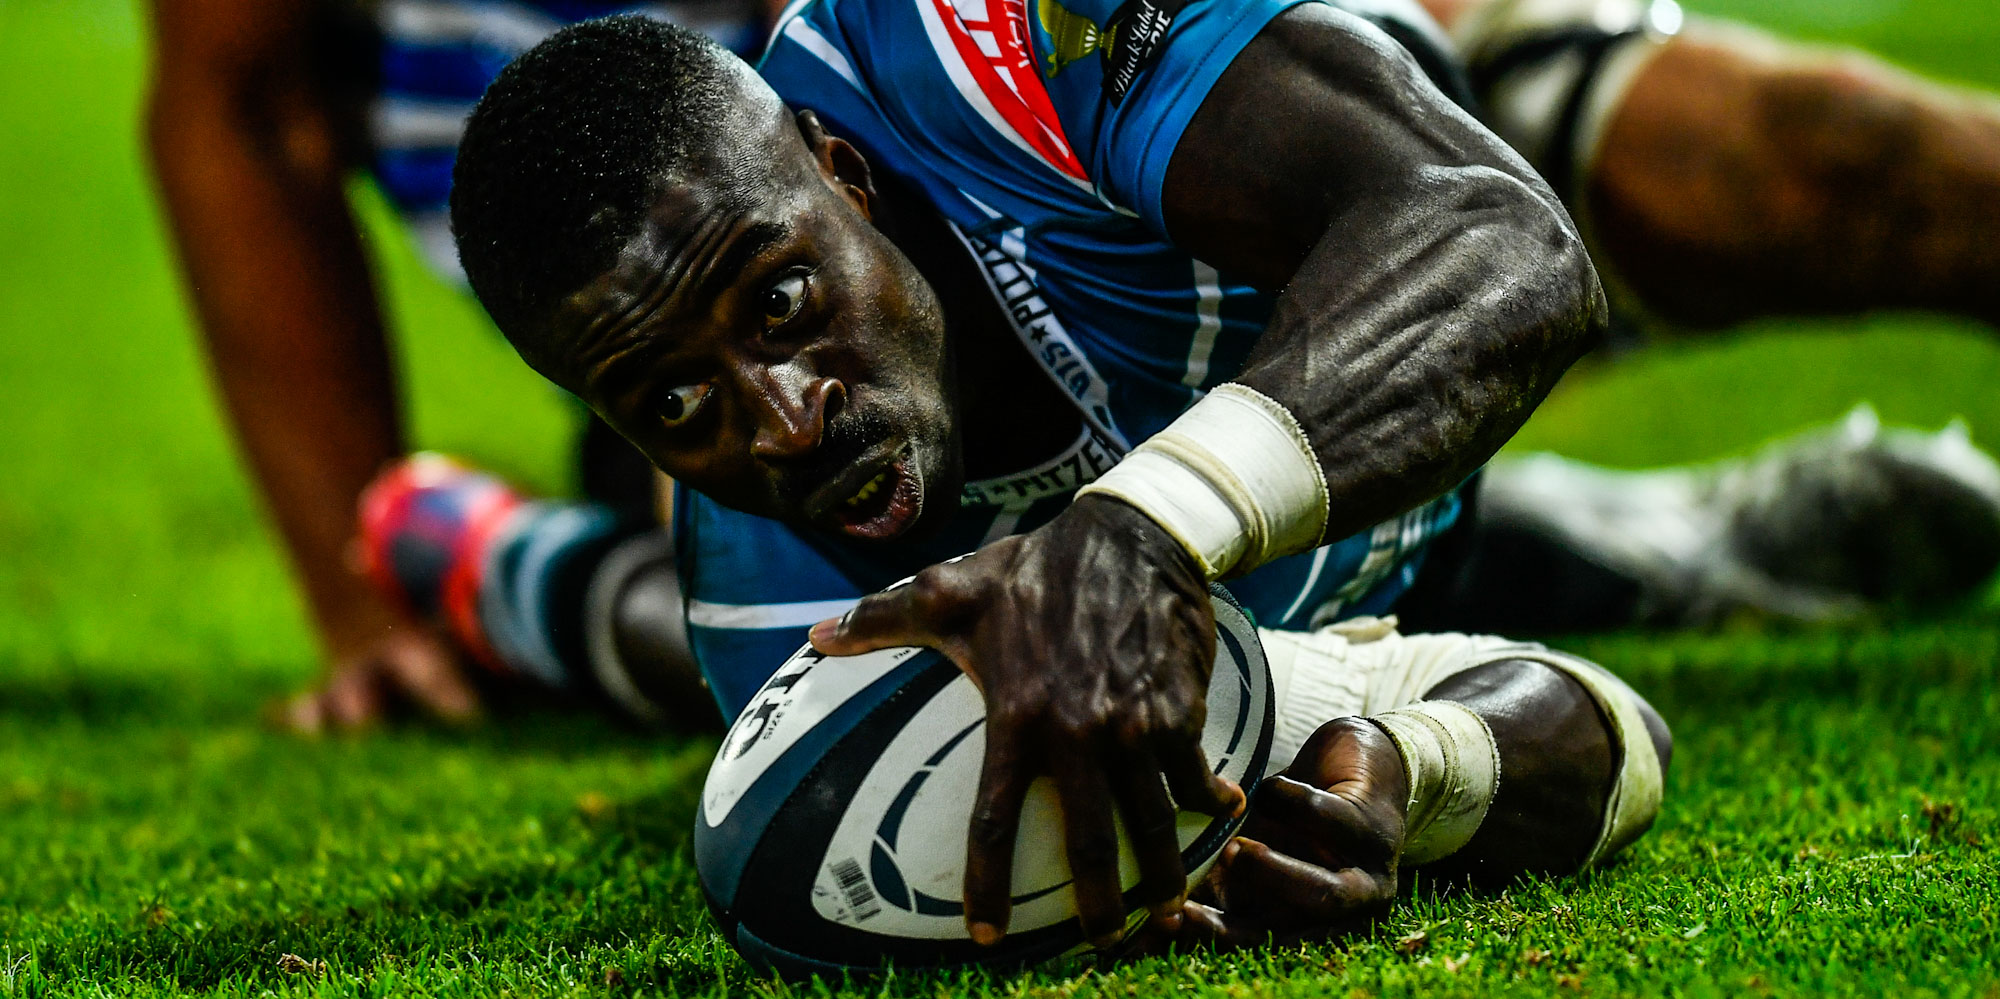 Luther Obi scores the match-winner for Windhoek Draught Griquas.